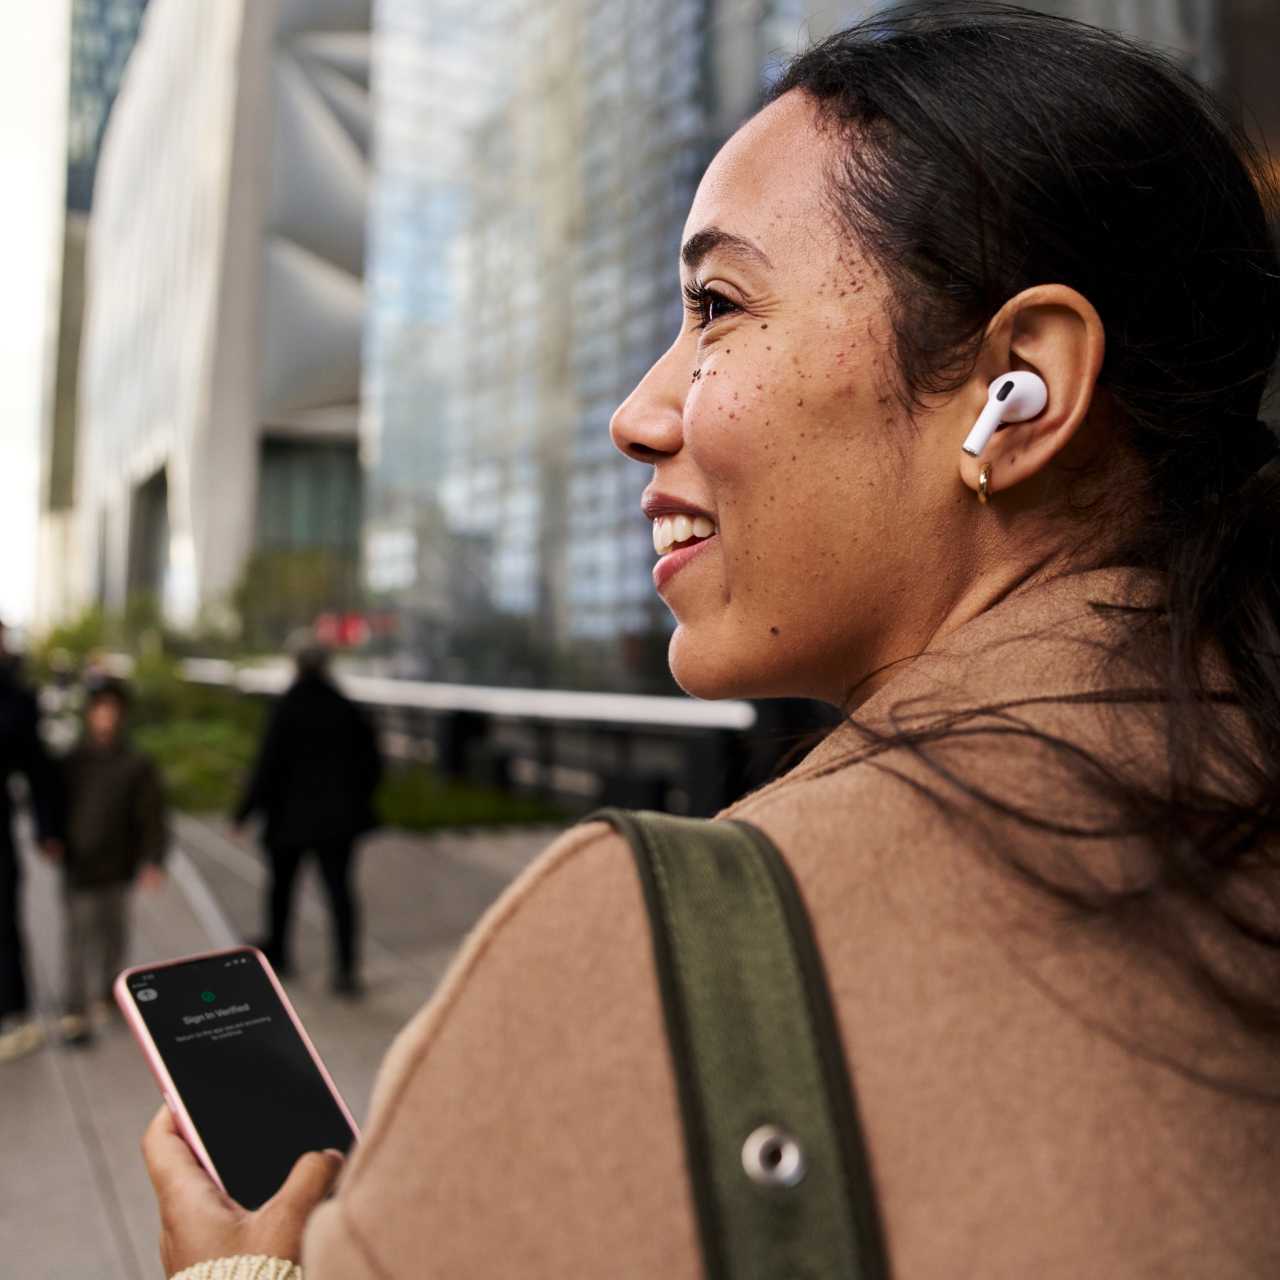 Woman walking on city street listening to airpods while using a smart device authenticated by Okta Verify